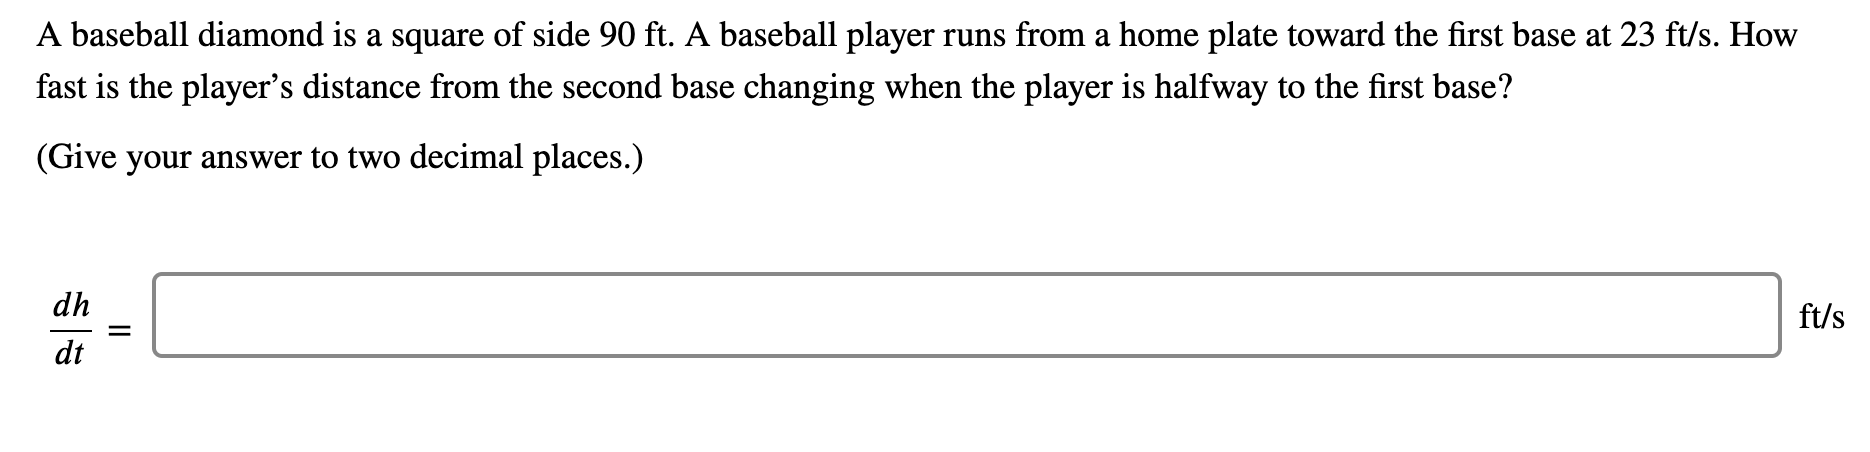 A baseball diamond is a square of side 90 ft. A baseball player runs from a home plate toward the first base at 23 ft/s. How
fast is the player's distance from the second base changing when the player is halfway to the first base?
(Give your answer to two decimal places.)
dh
ft/s
dt
